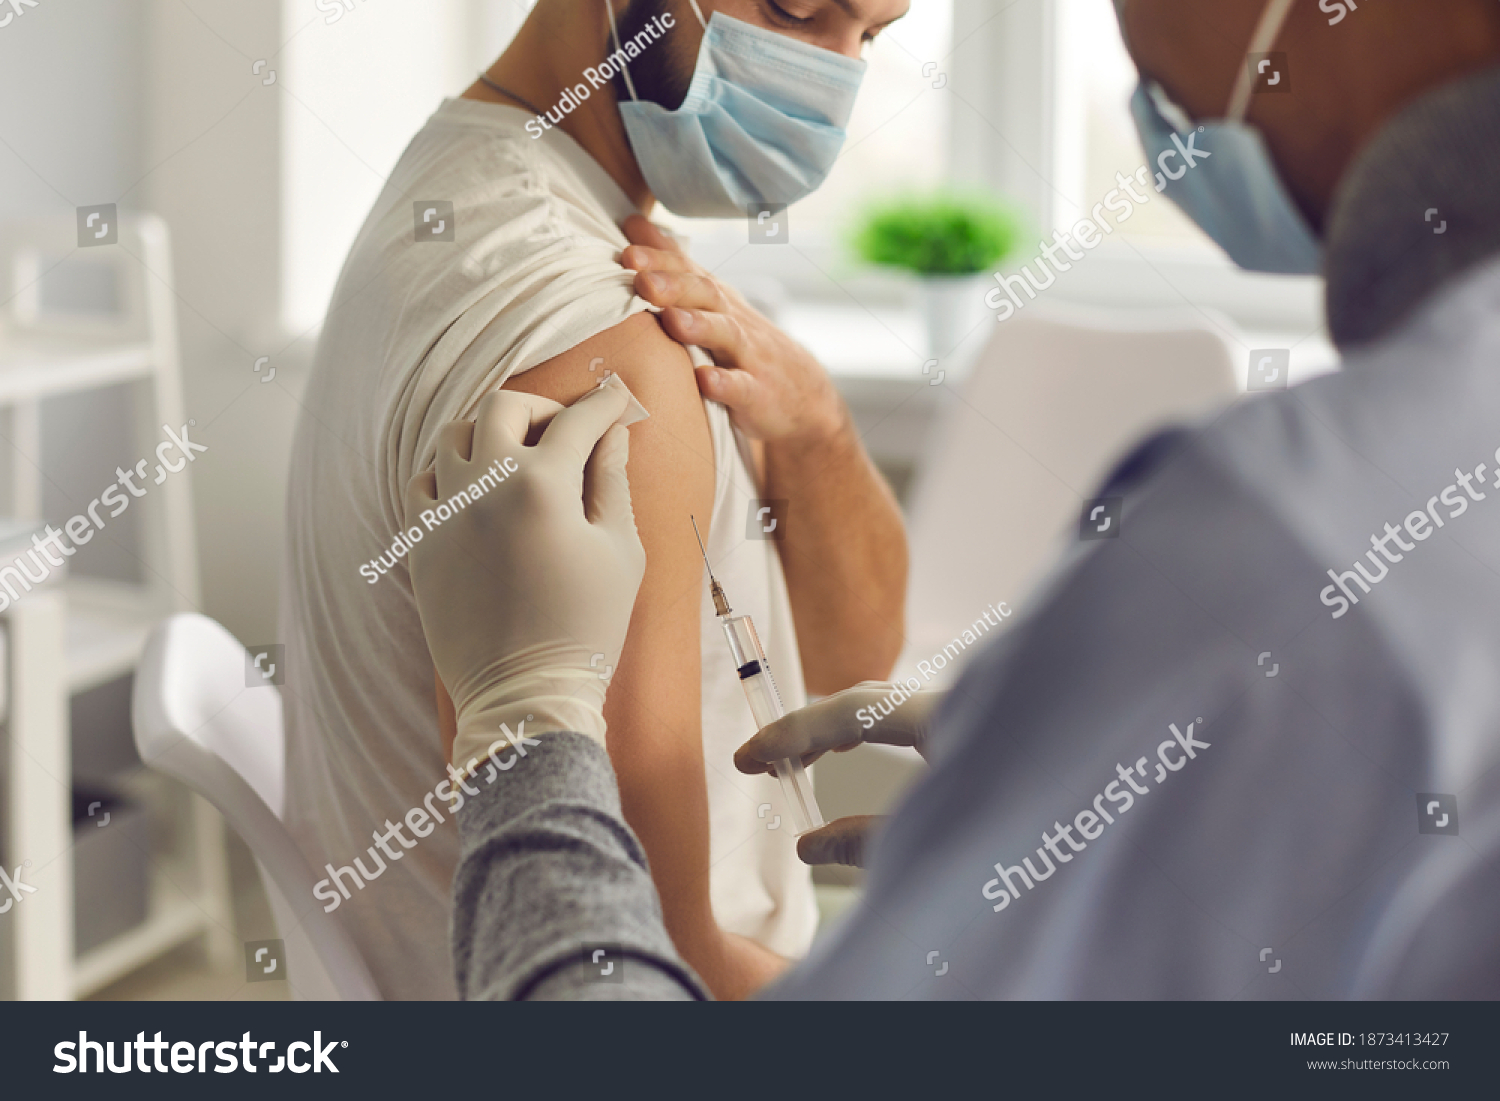 Immunization and disease prevention concept. Doctor giving antivirus injection to young man. Close-up patient in medical face mask getting flu or Covid-19 antiviral vaccine during vaccination campaign #1873413427